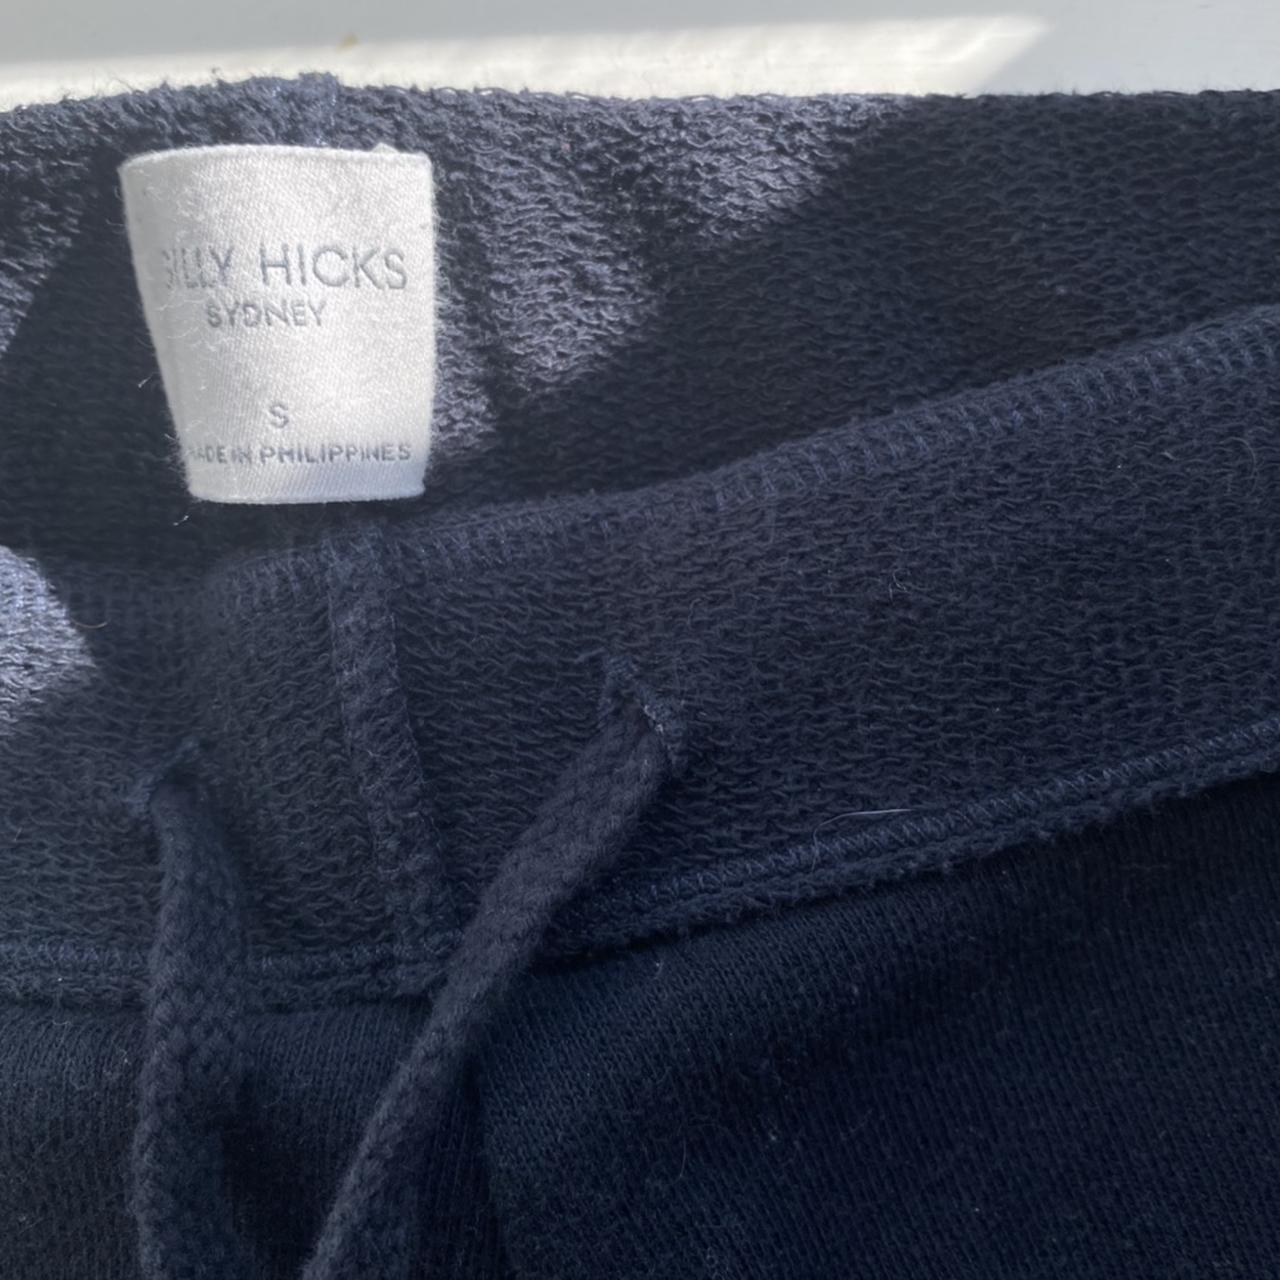 wide-leg cuffed gilly hicks sweatpants in navy, with... - Depop